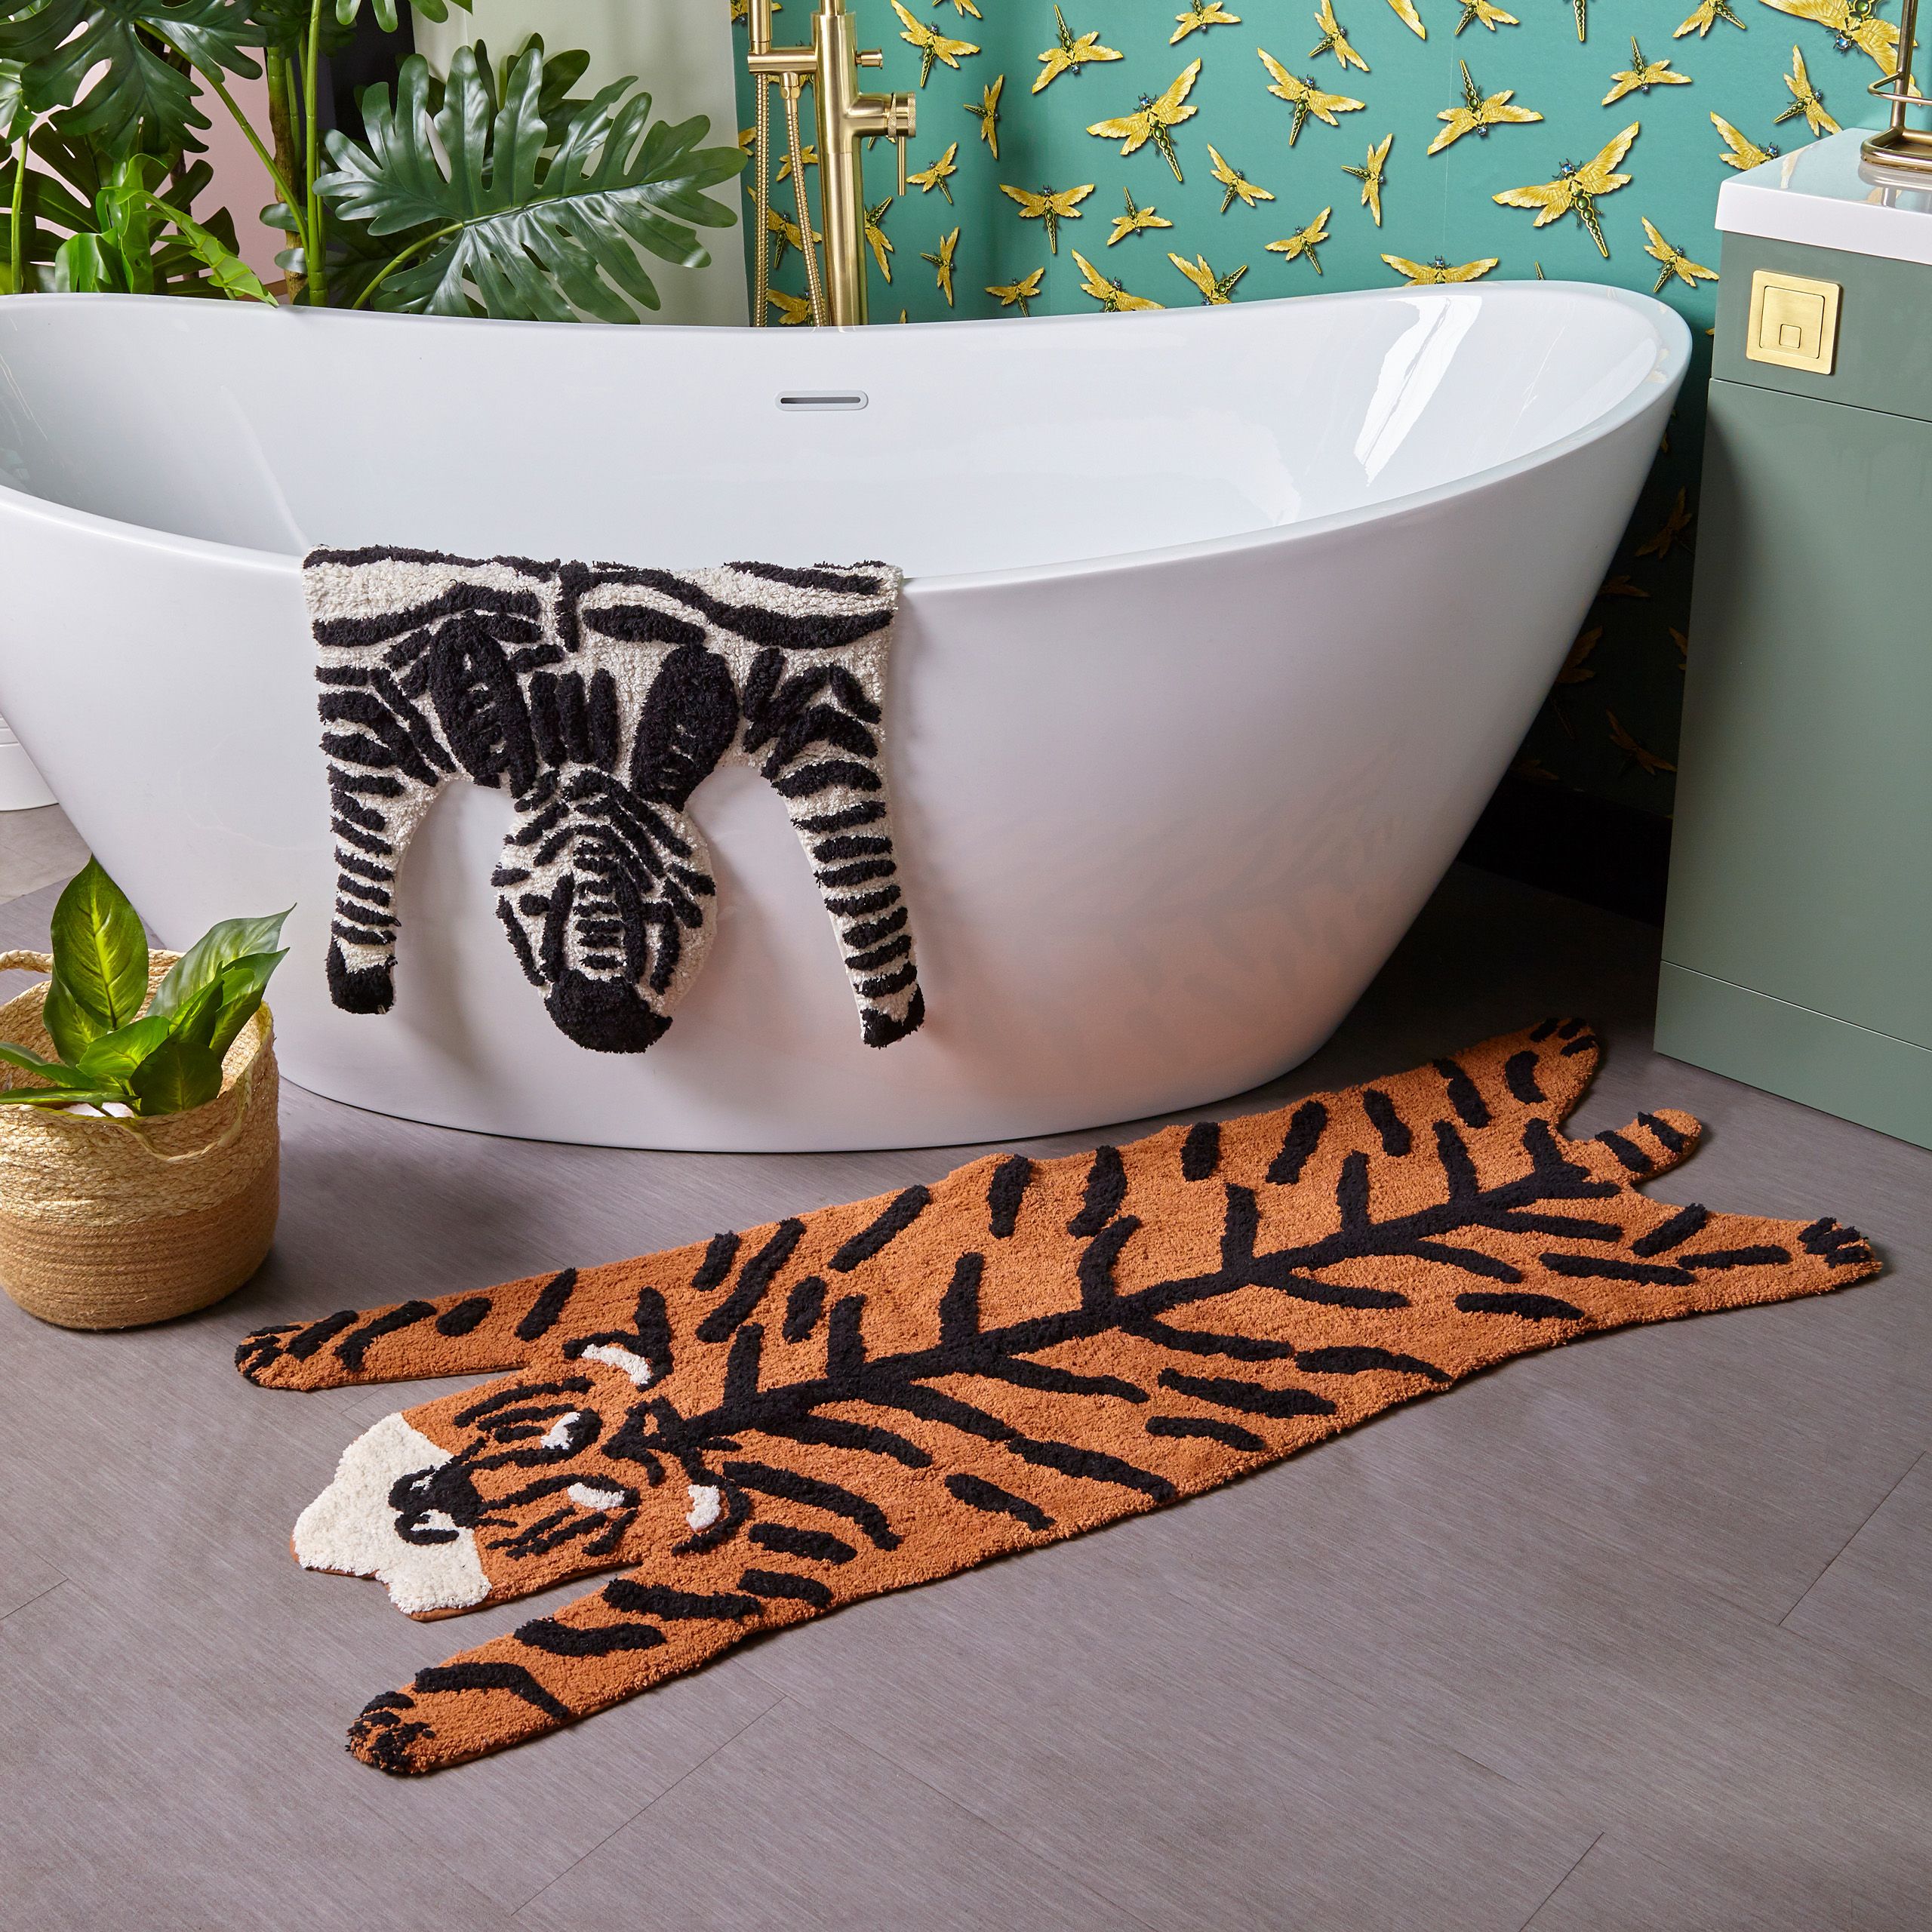 Featuring a bold tiger-shaped design, on soft burnt orange cotton fabric. Made from 100% Cotton, making this bath mat incredibly soft under foot. This bath mat has an anti-slip quality, keeping it securely in place on your bathroom floor. The 1800 GSM ensures this bath mat is super absorbent preventing post-bath or shower puddles.